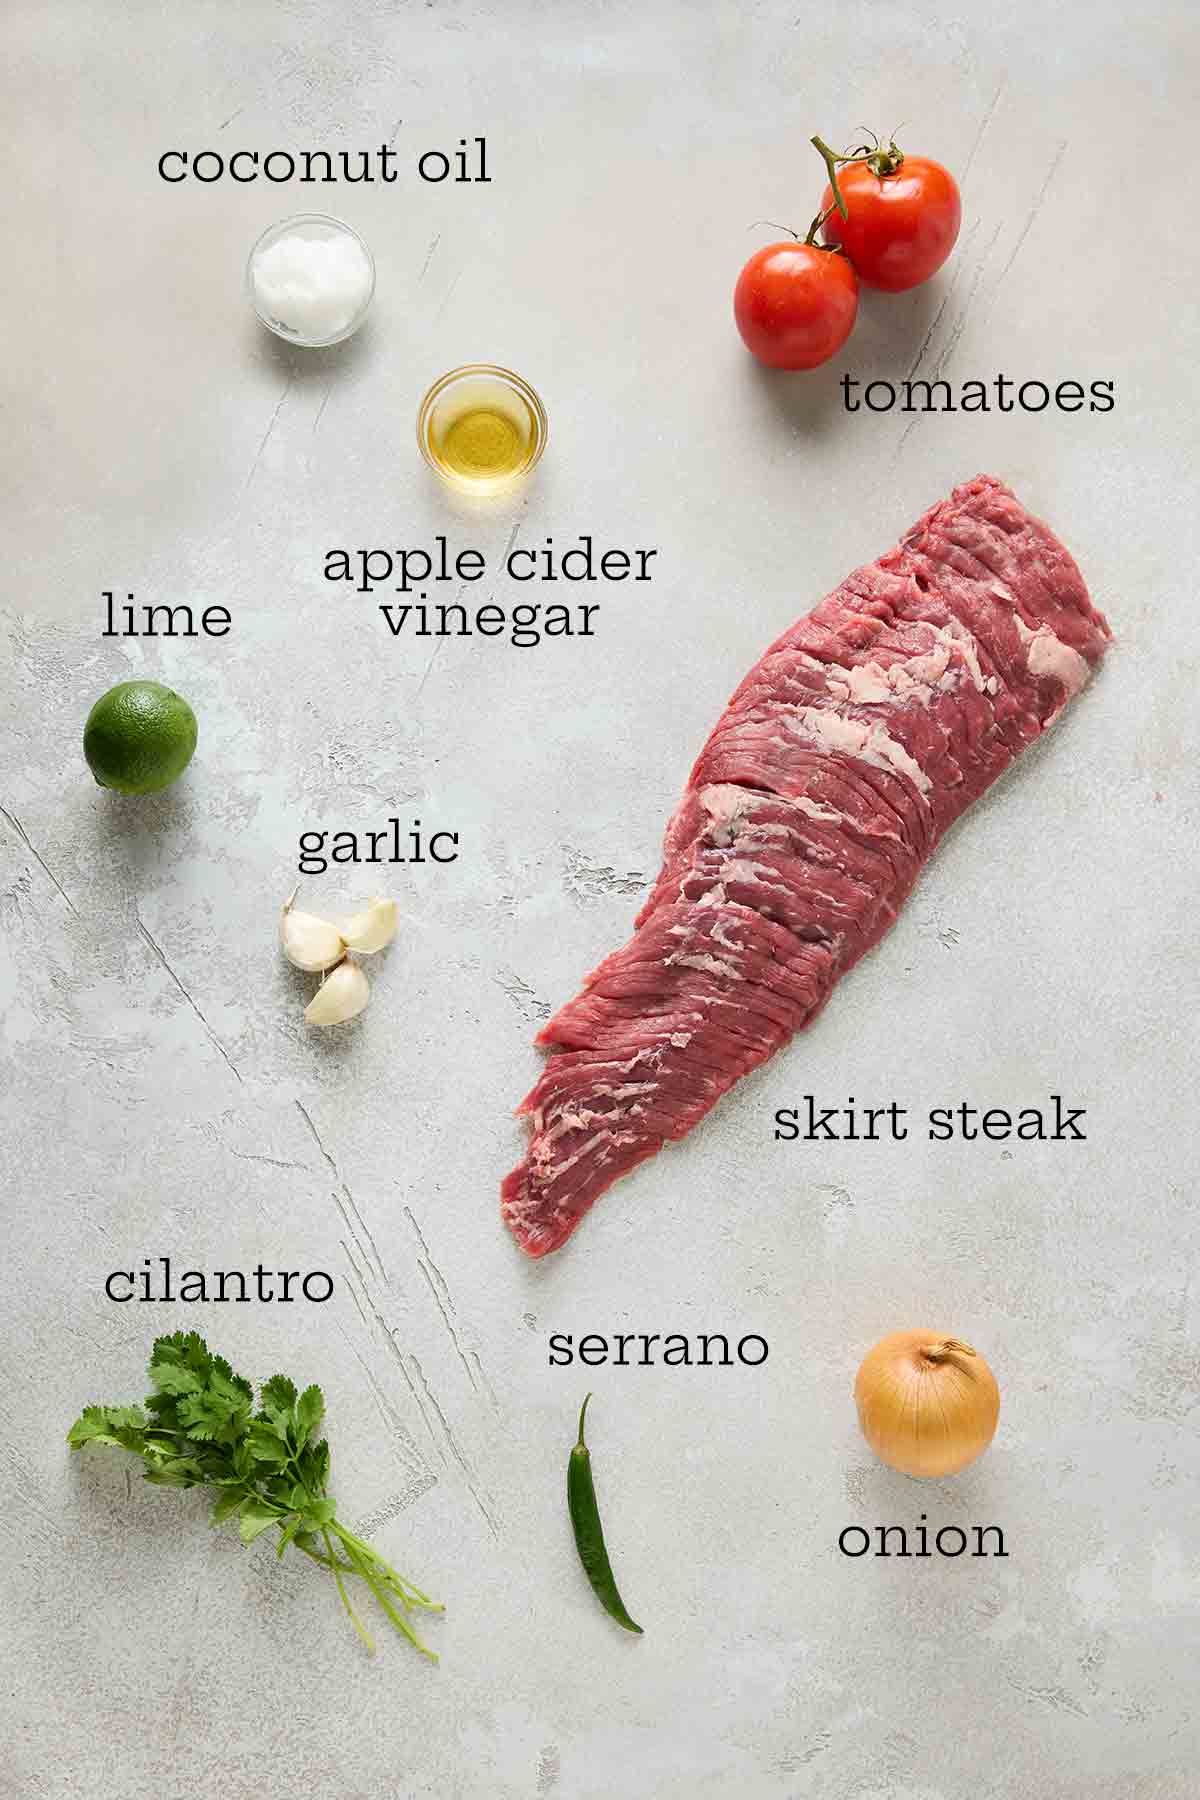 Ingredients for seared skirt steak with salsa--coconut oil, tomatoes, apple cider vinegar, lime, garlic, skirt steak, cilantro, serrano, and onion.